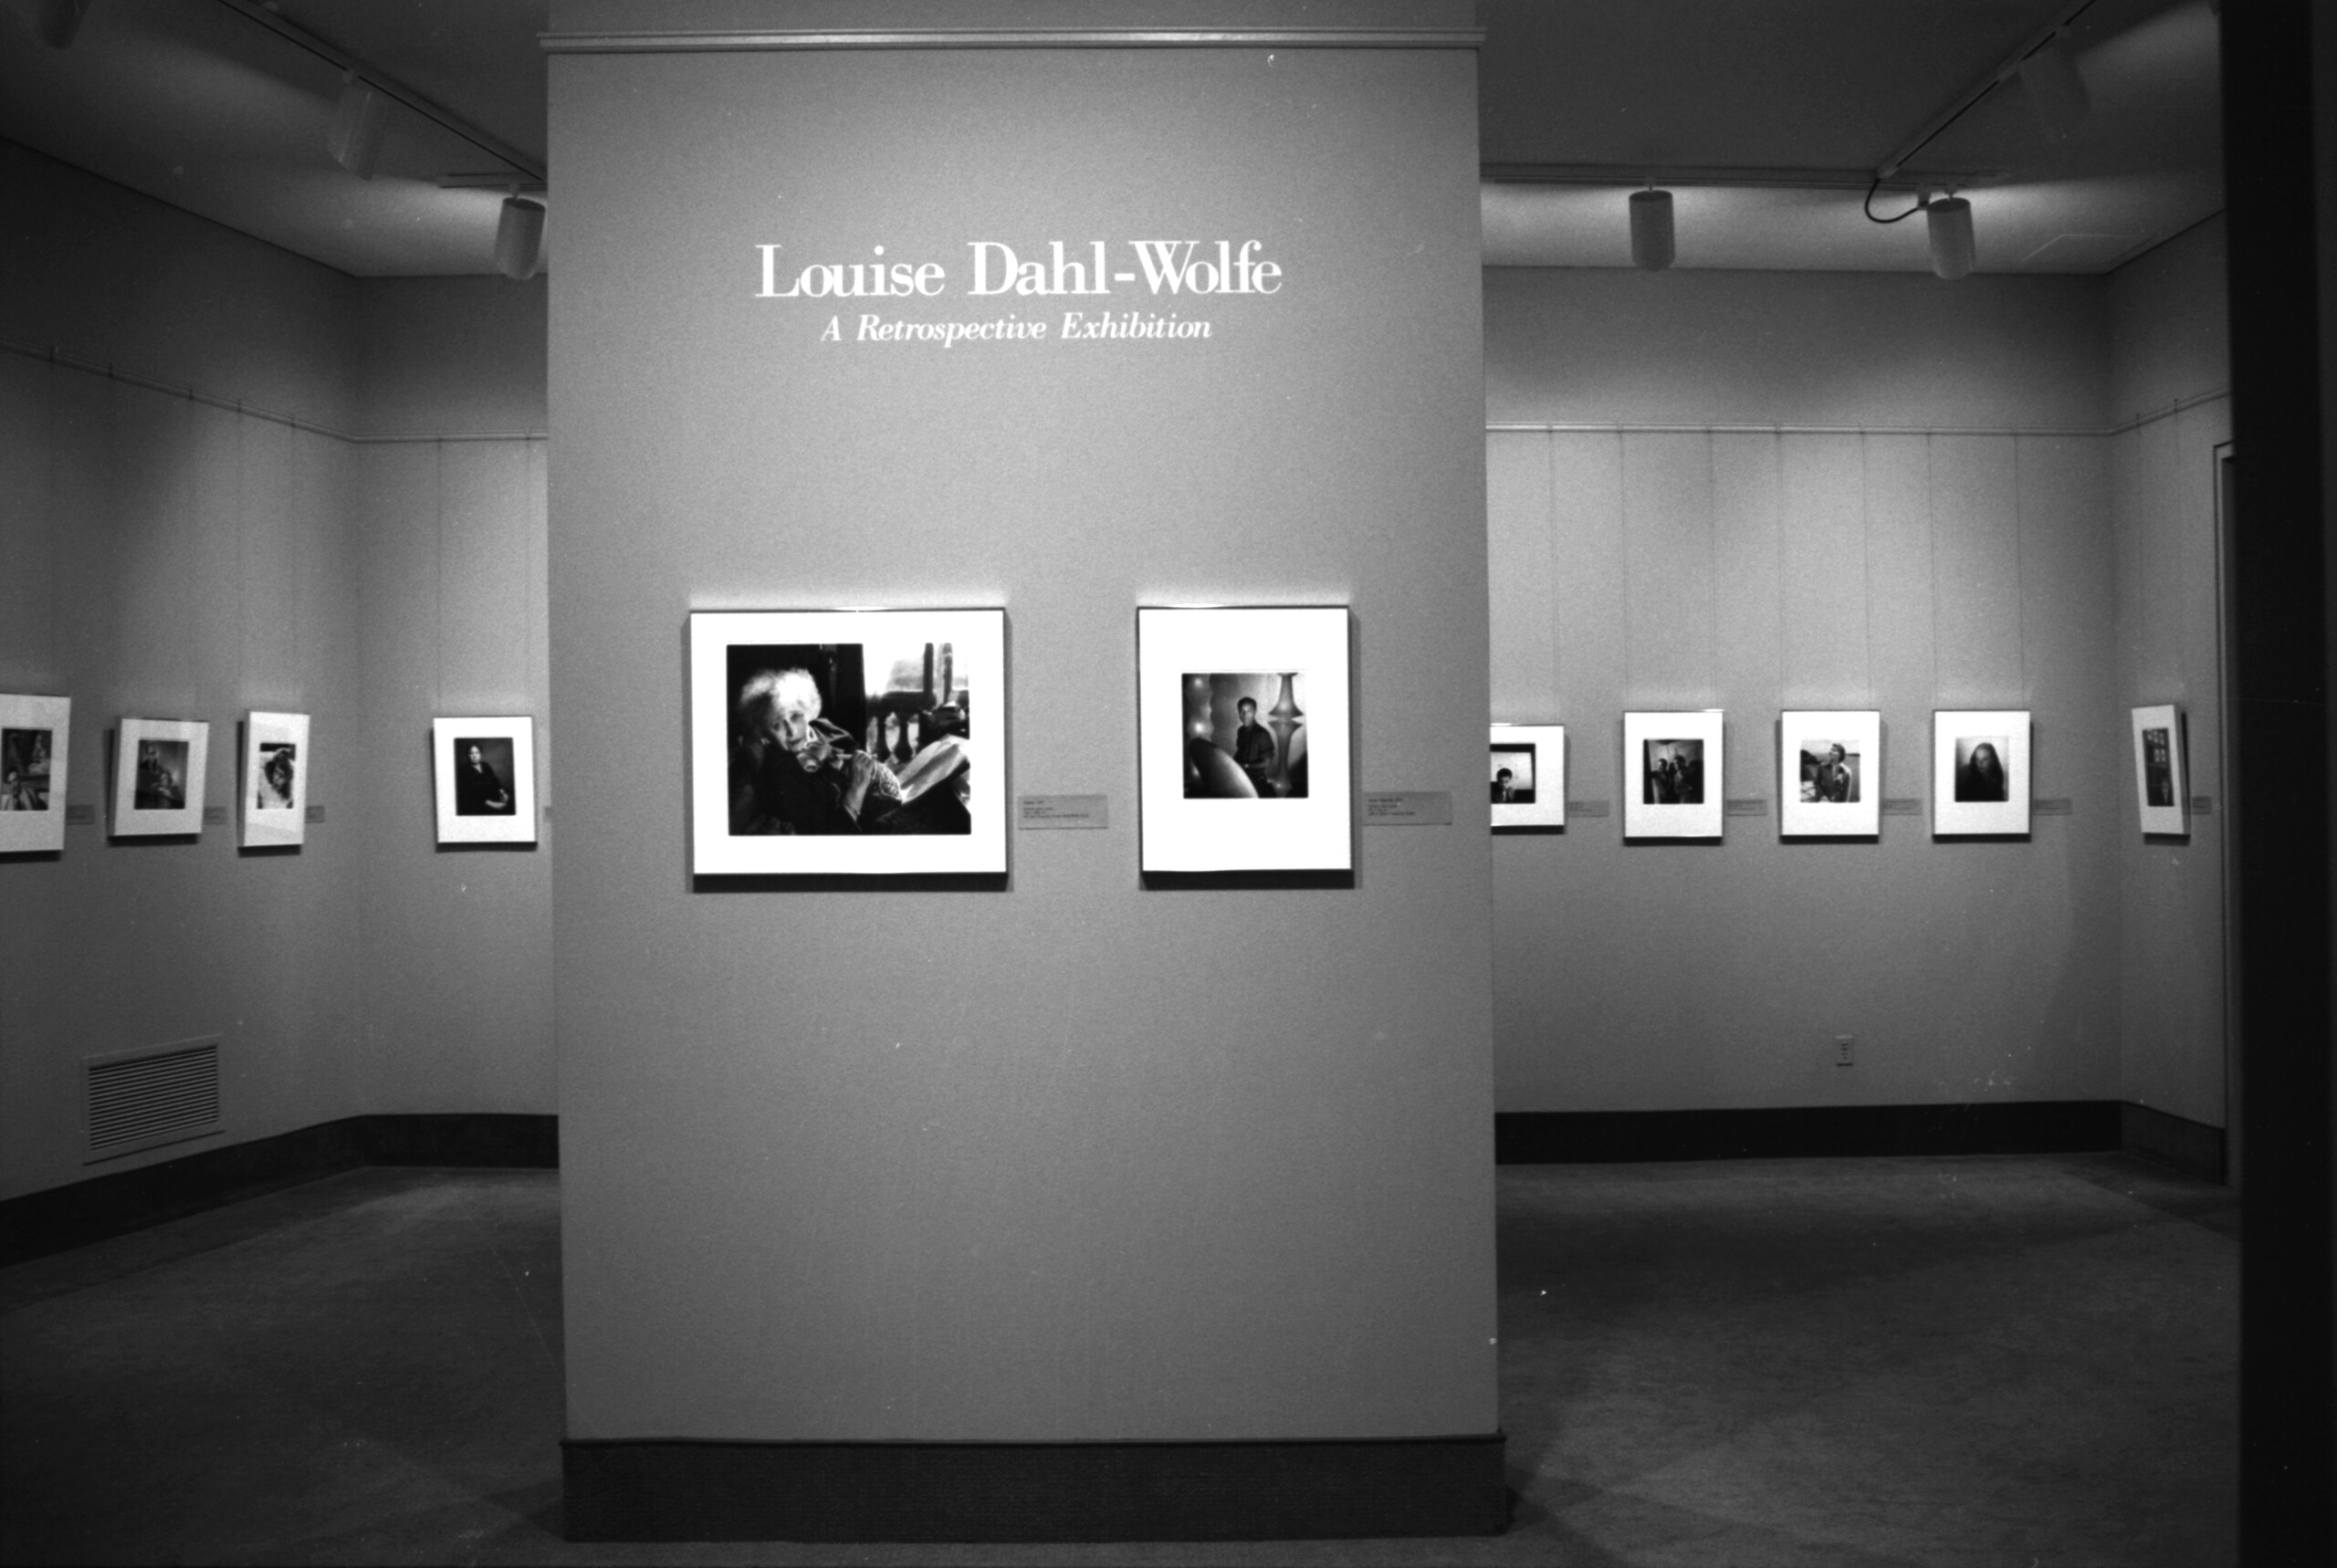 A view of a gallery space. The black-and-white photograph shows several photographs hanging on a white wall. Above the photographs, it says in big letters: 